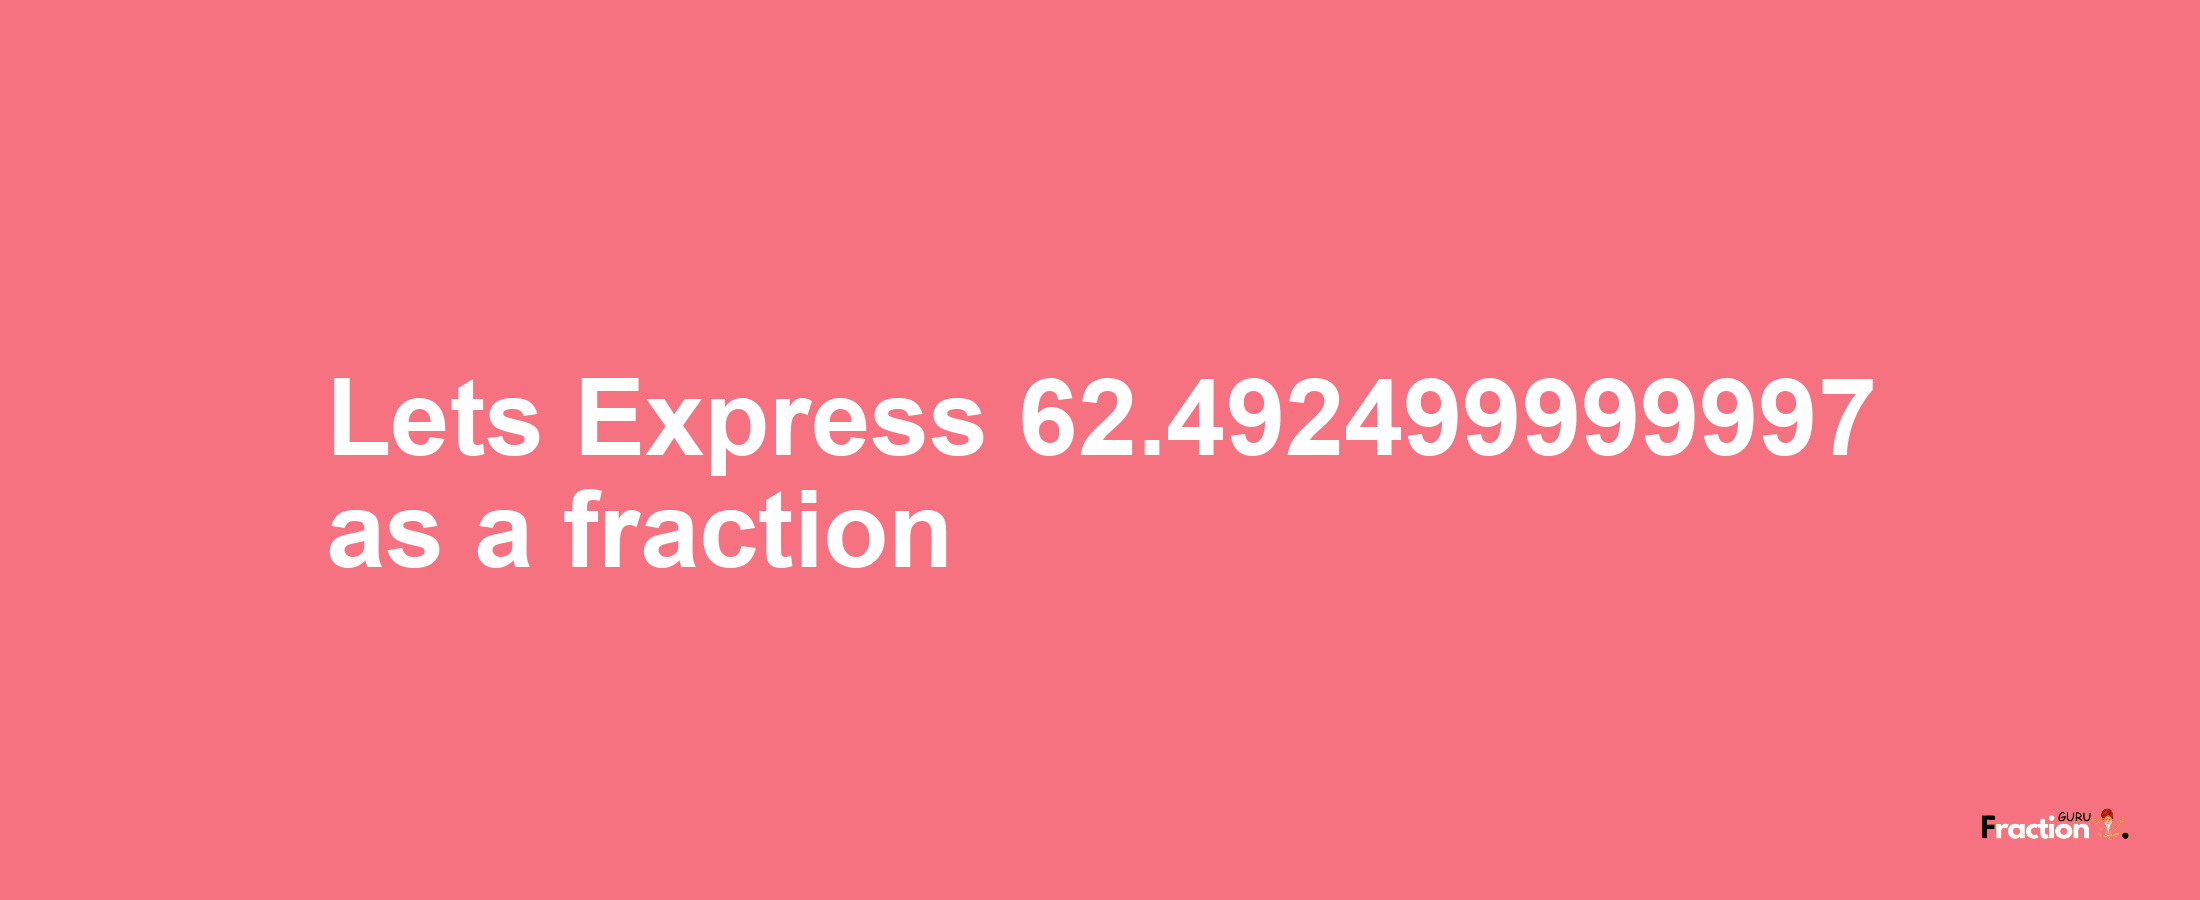 Lets Express 62.492499999997 as afraction